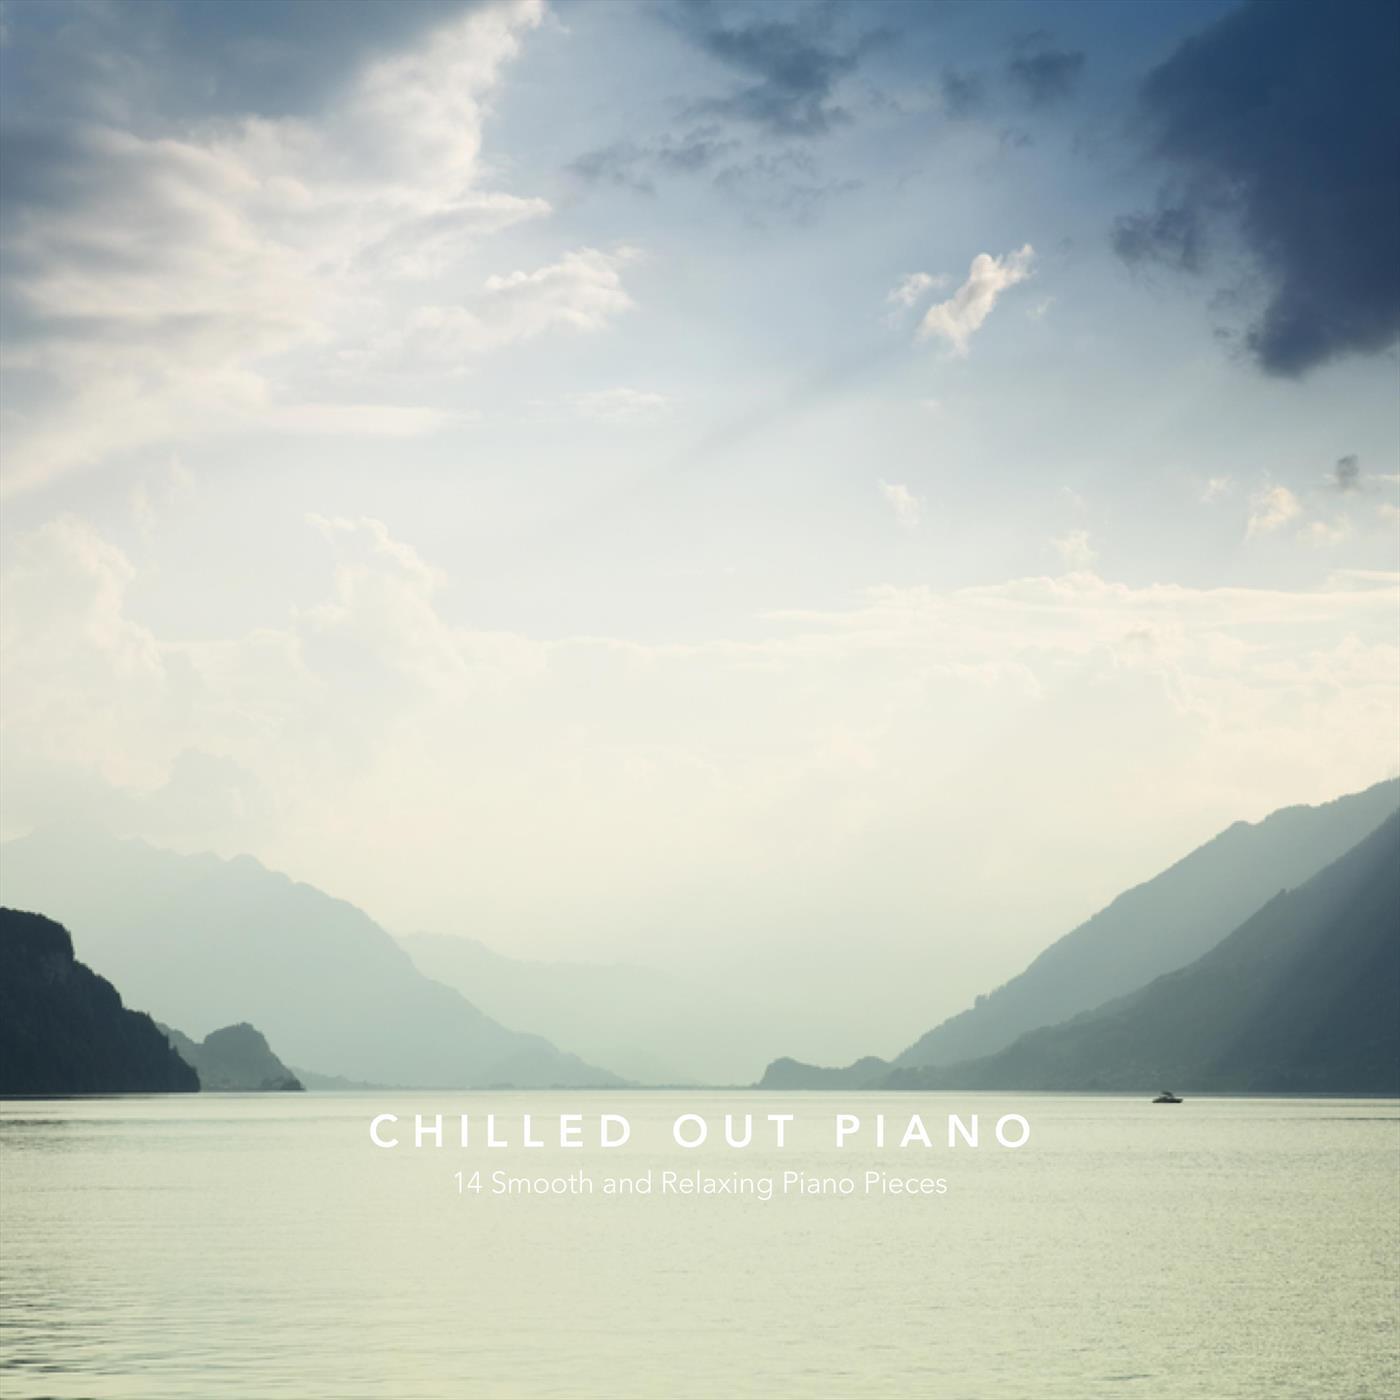 Chilled Out Piano: 14 Smooth and Relaxing Piano Pieces